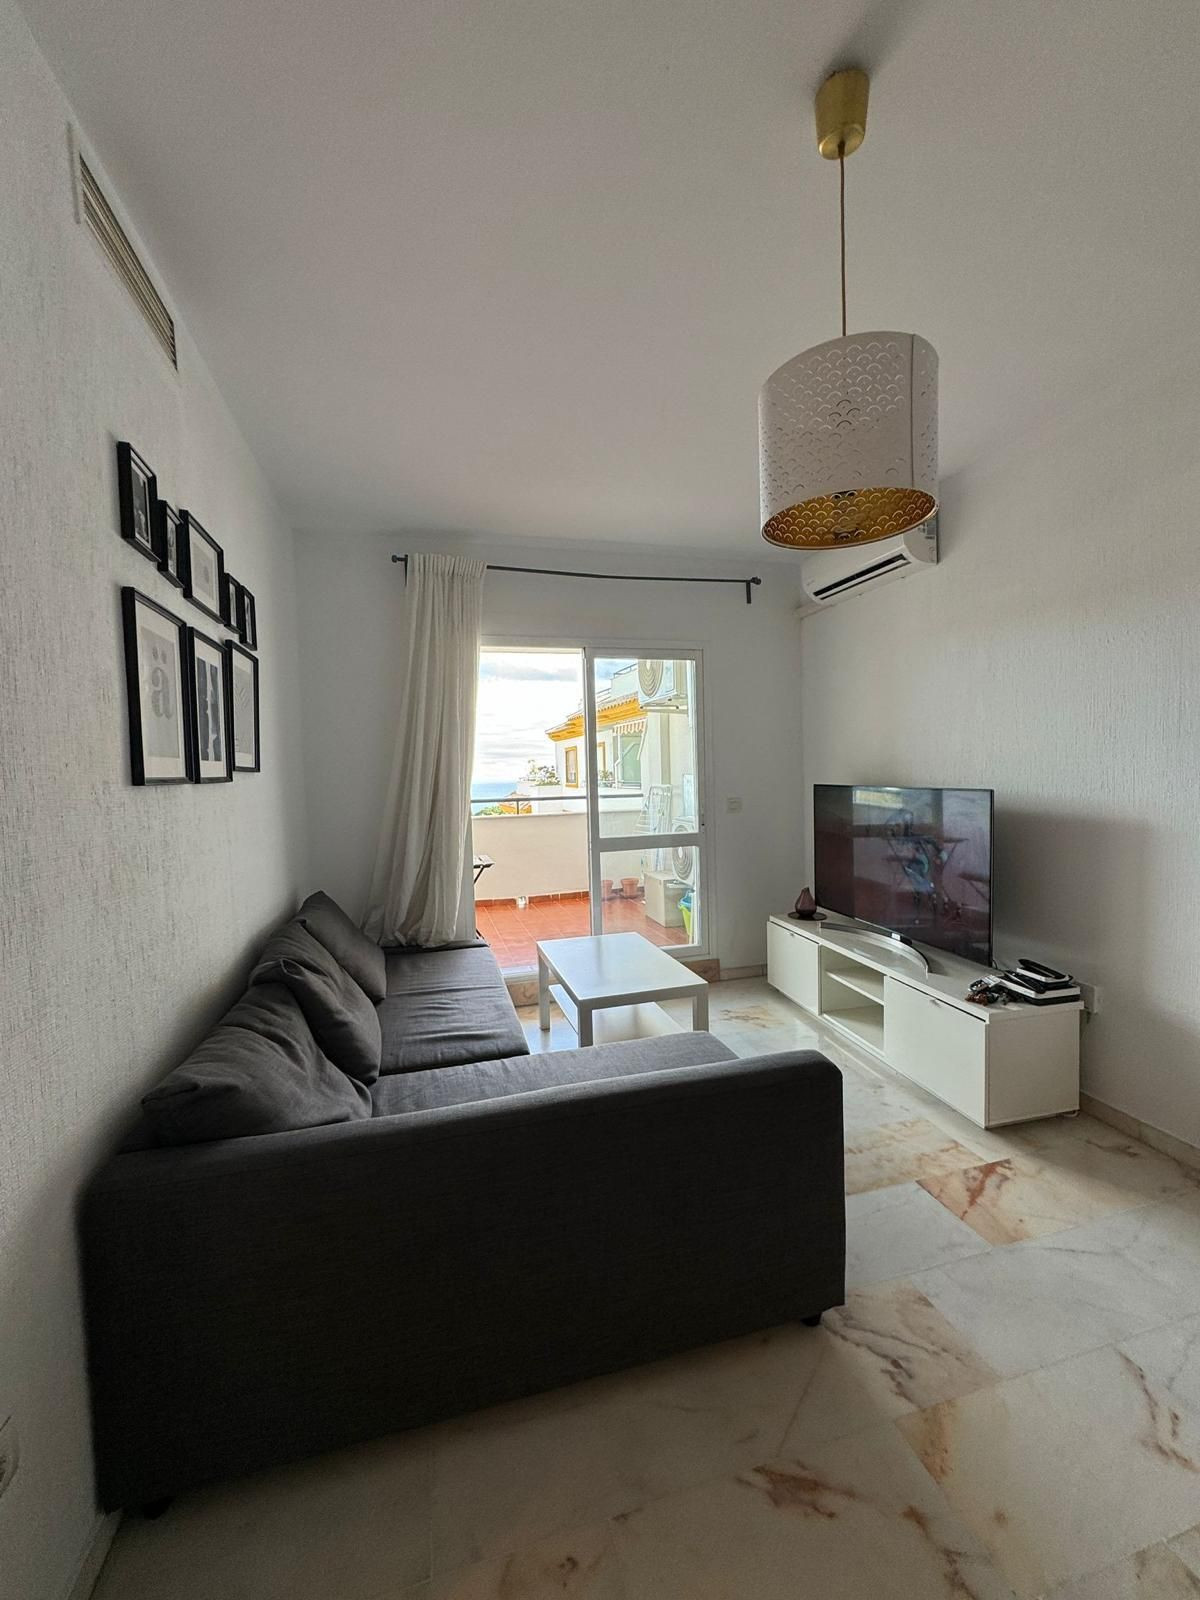 						Apartment  Middle Floor
													for sale 
																			 in Benalmadena
					